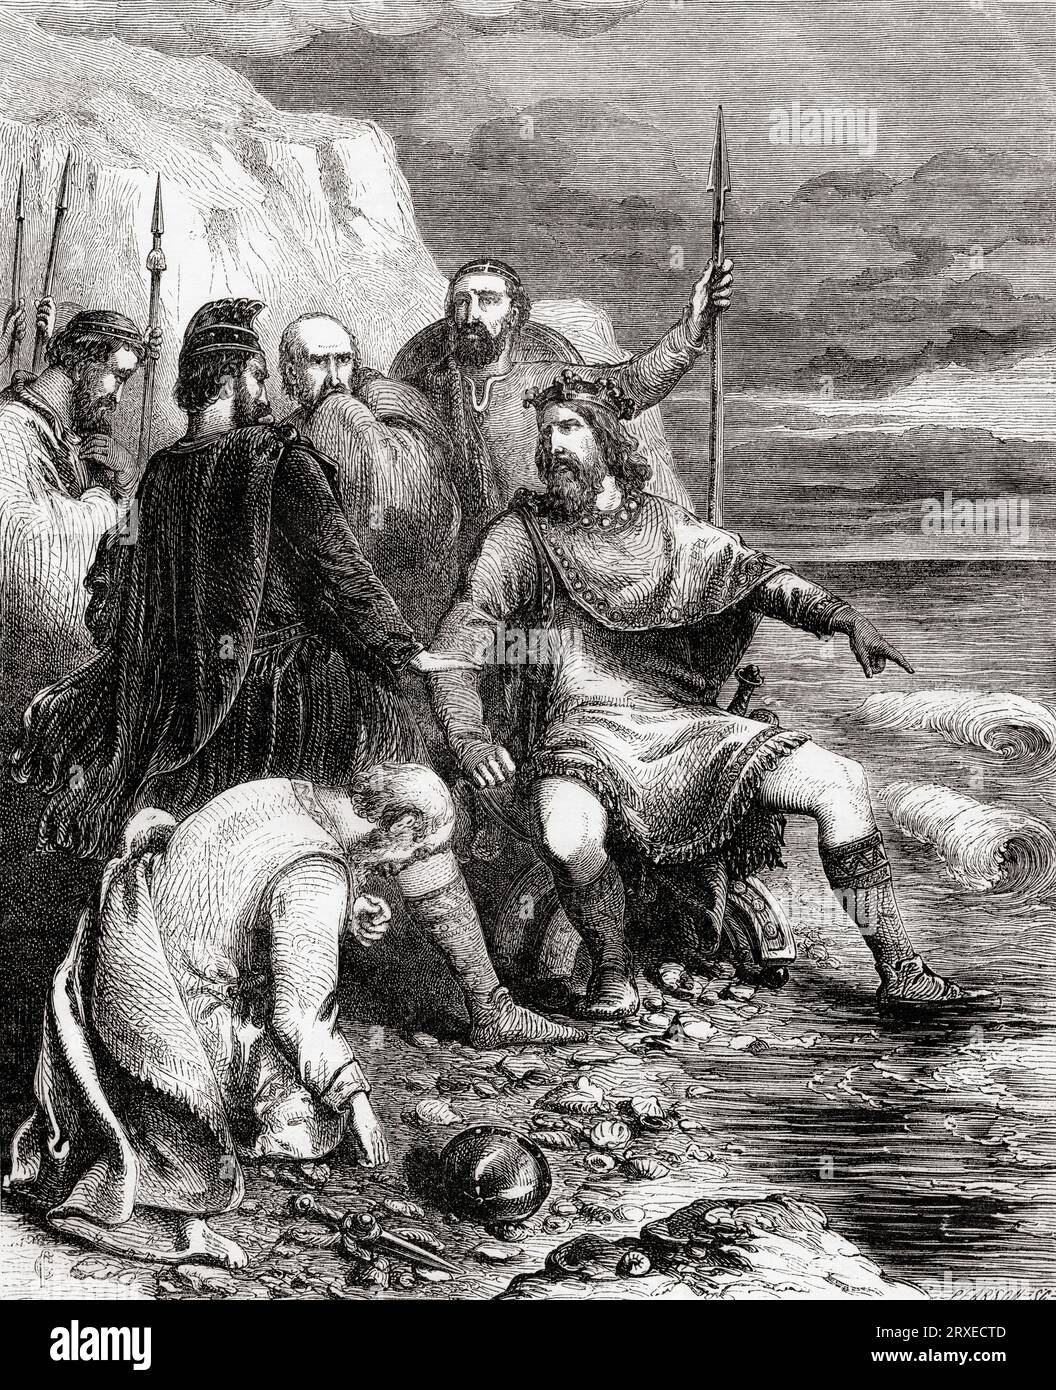 King Canute reproving his courtiers for believing he had power over the elements.  He had commanded the sea to stay off his land.  When it drenched his feet he rebuked his entourage for their stupid flattery.  Cnut, c. 990 – 1035, aka Cnut the Great and Canute. King of England from 1016, King of Denmark from 1018, and King of Norway from 1028 until his death in 1035.  From Cassell's Illustrated History of England, published 1857. Stock Photo